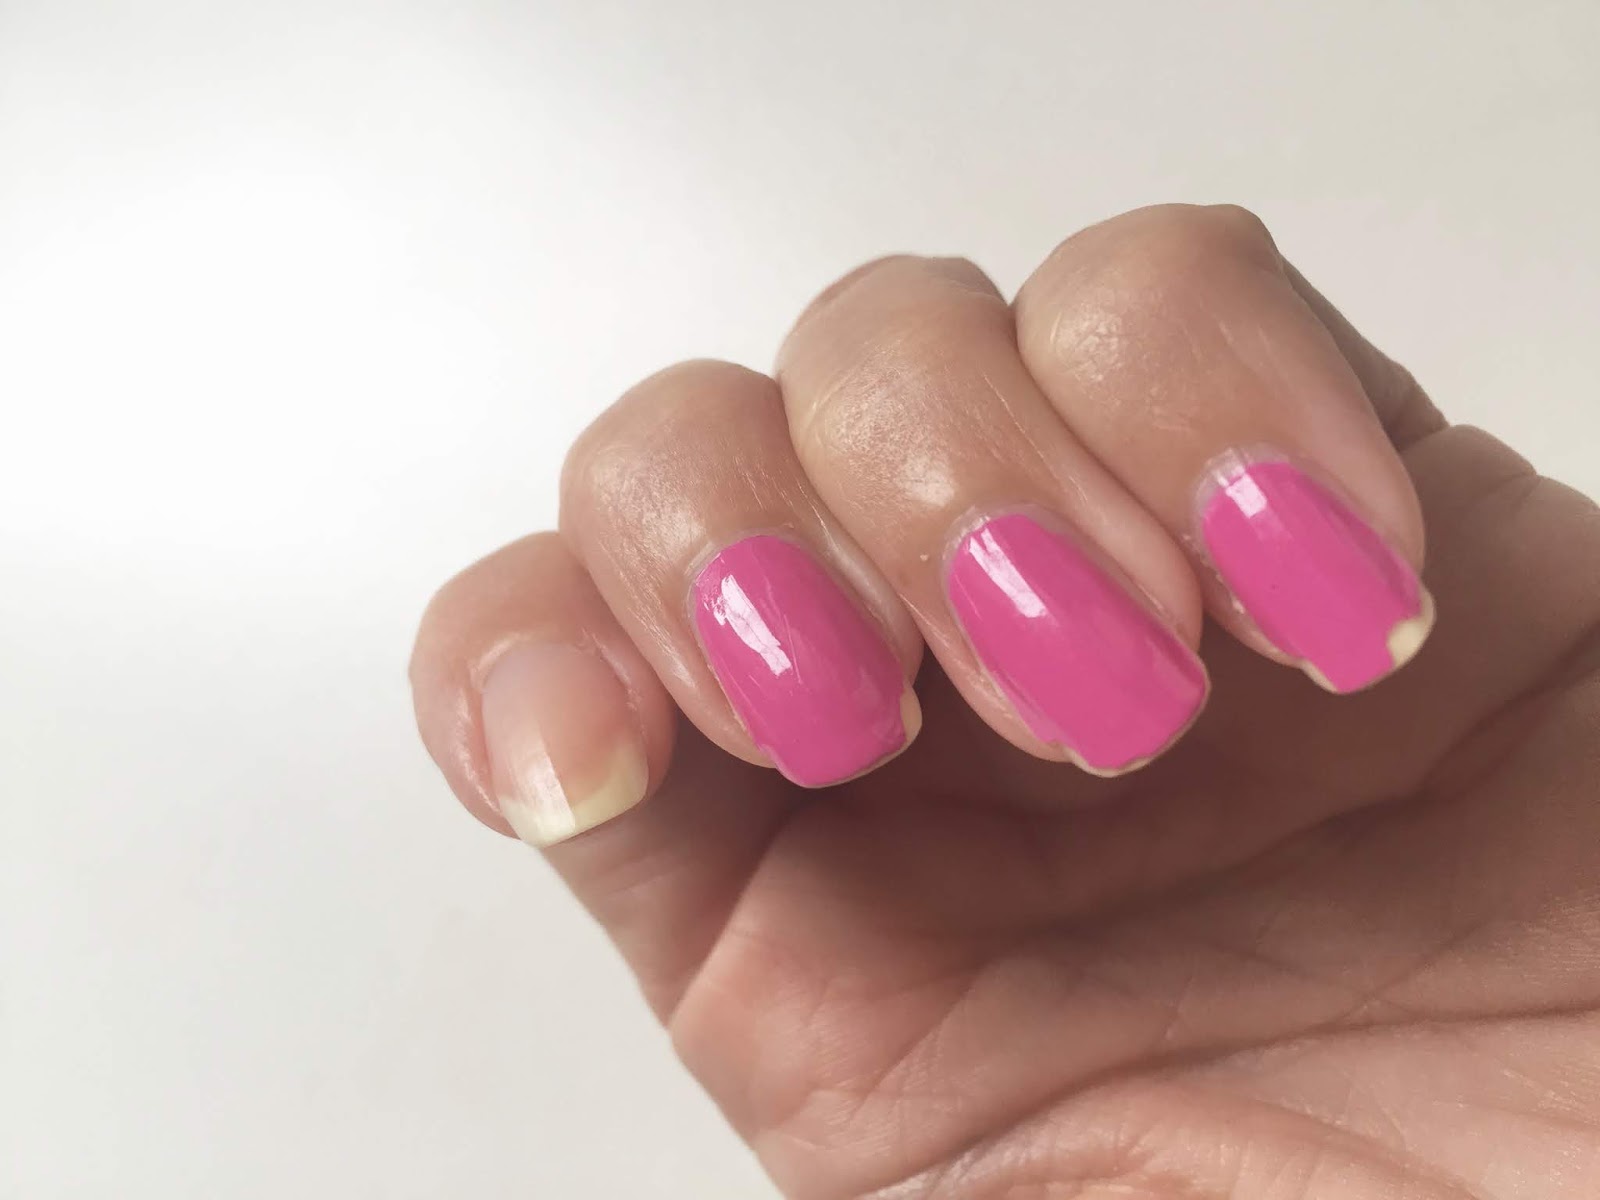 Can you use a top coat as a base coat?